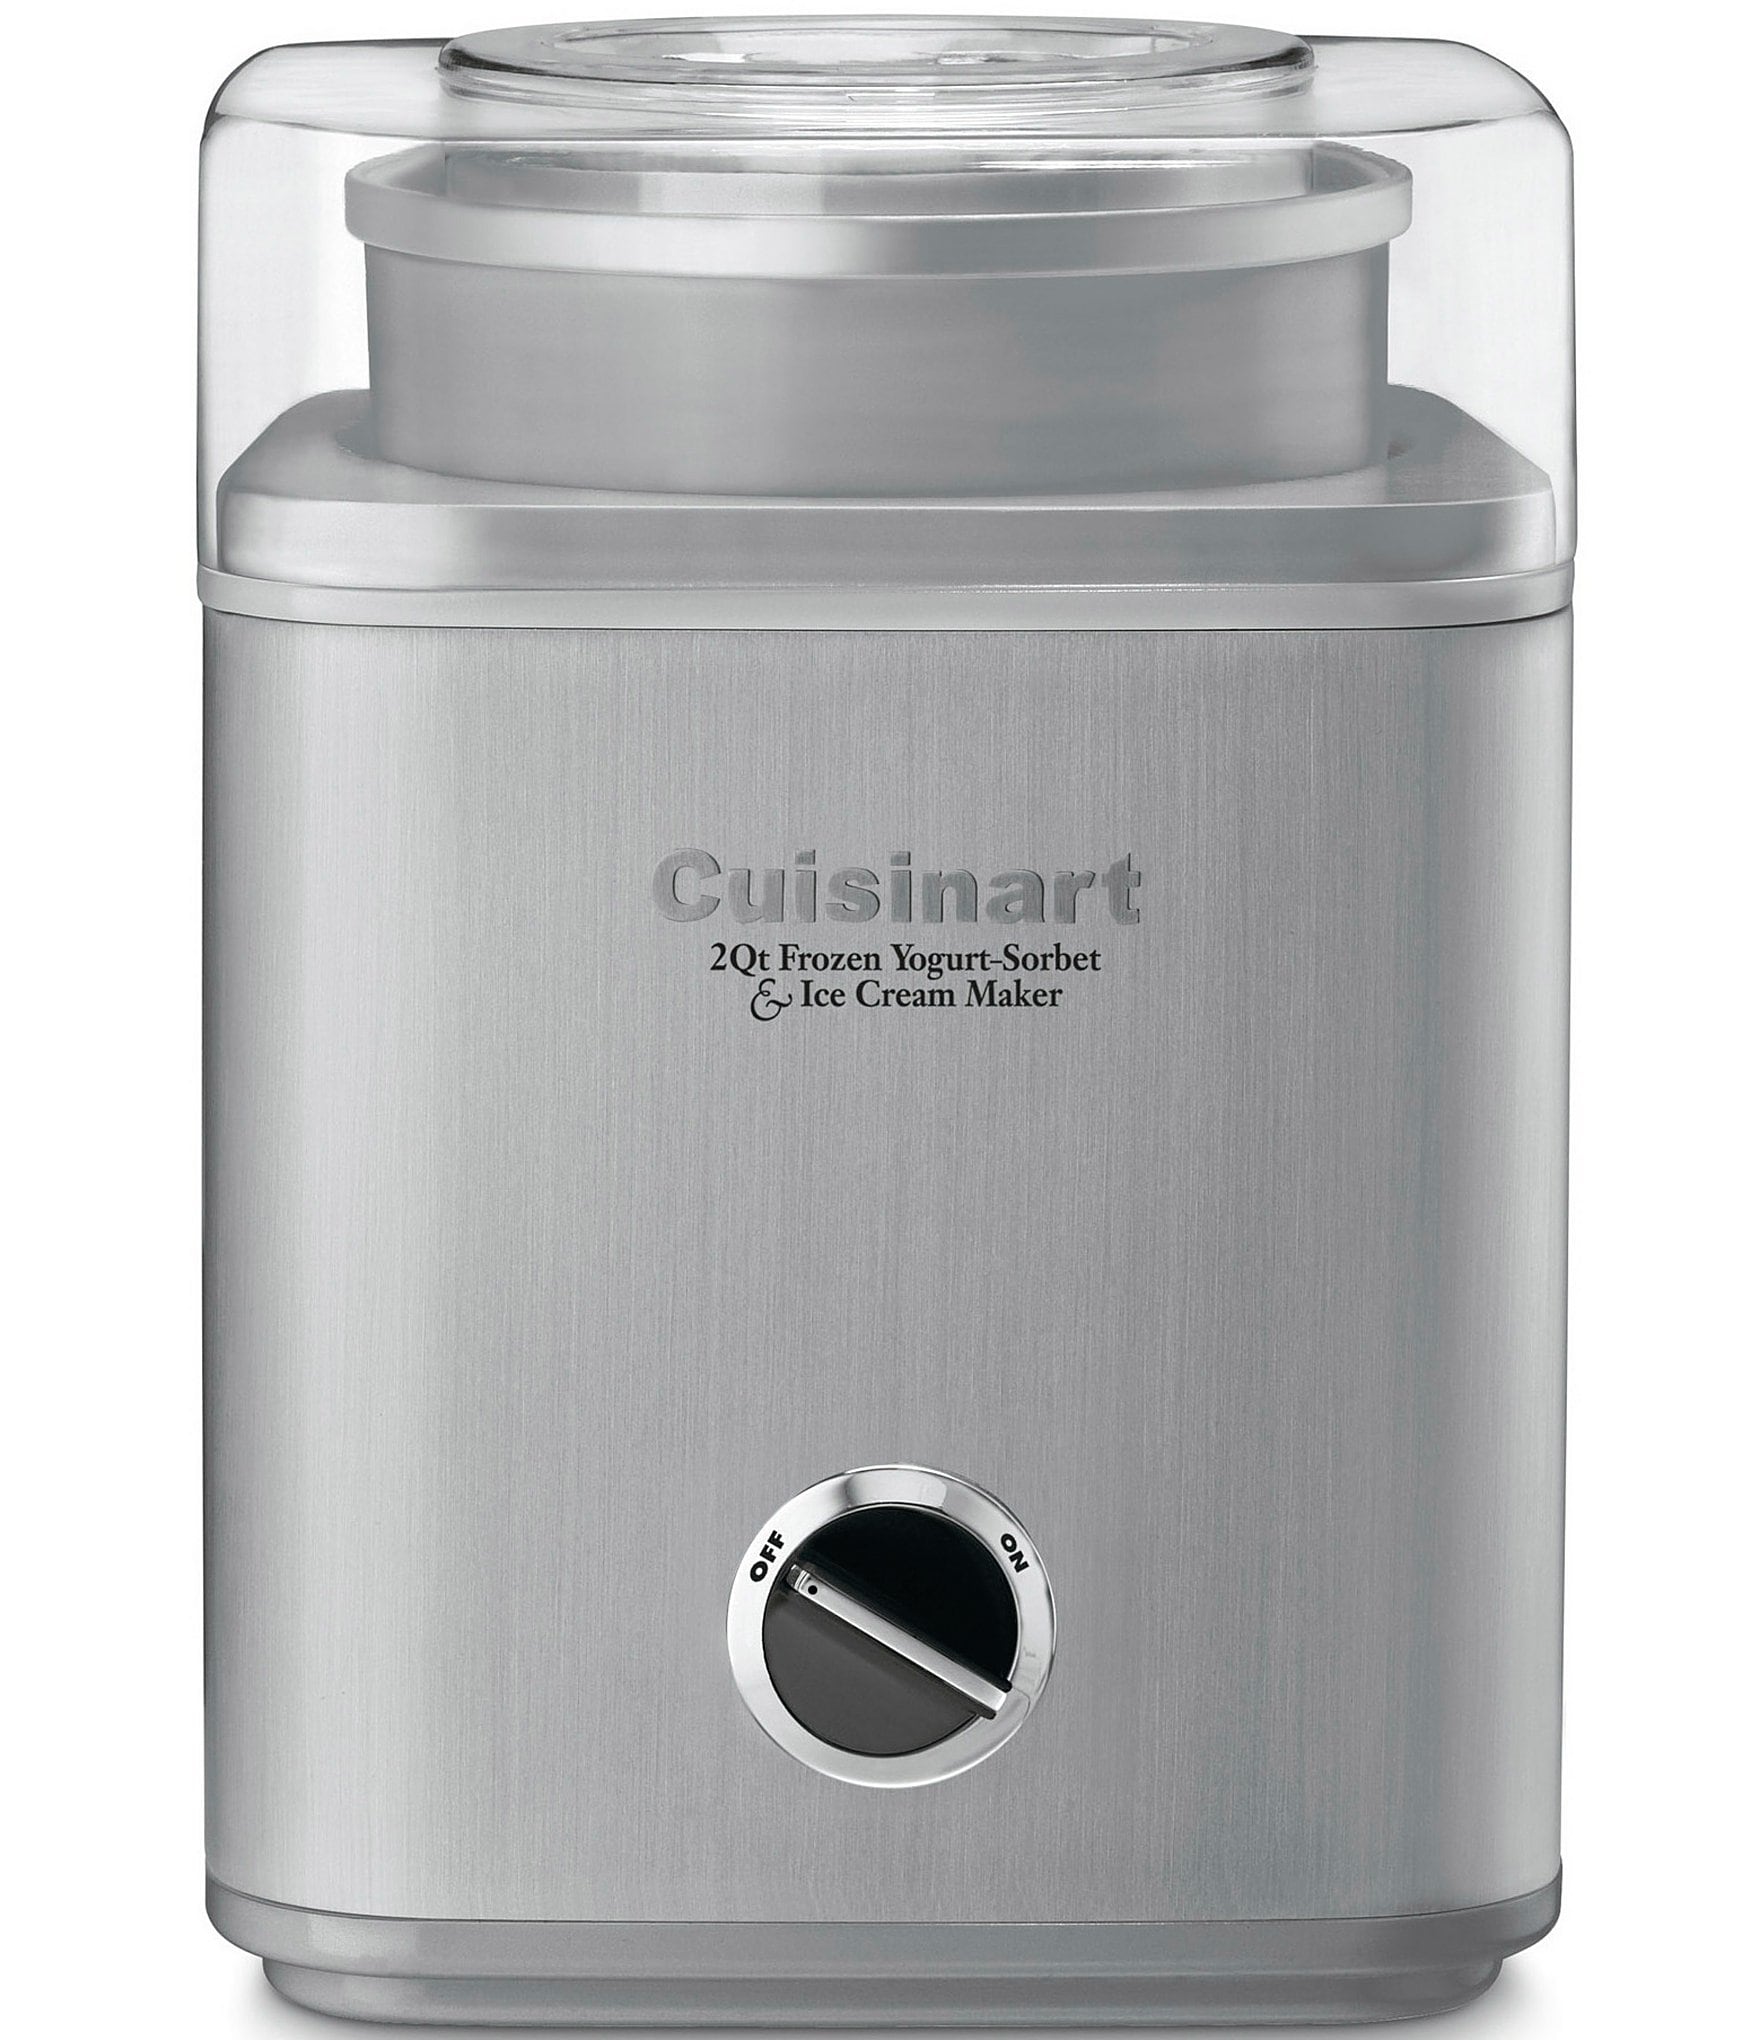 Cuisinart Stainless Steel Egg Cooker in he Box - appliances - by